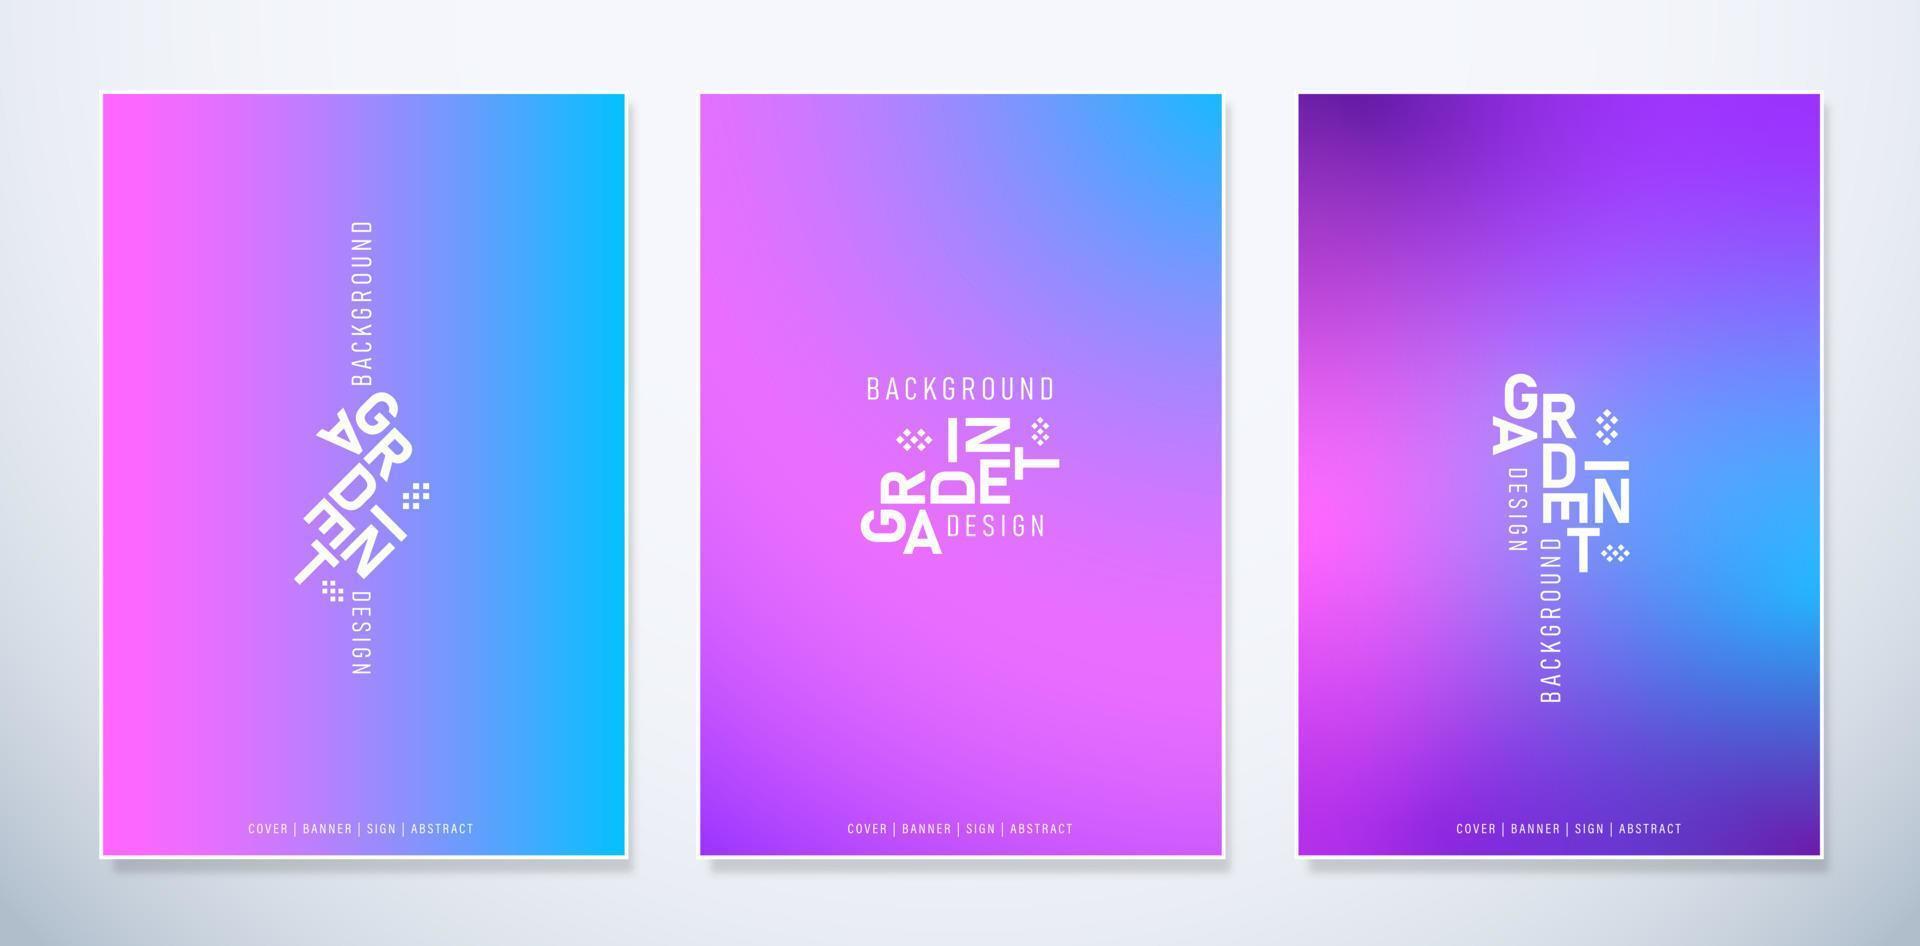 abstract gradient pink blue purple background, applicable for website interface, poster sign corporate, billboard, header, digital media advertising, social media posts, ads campaign marketing agency vector